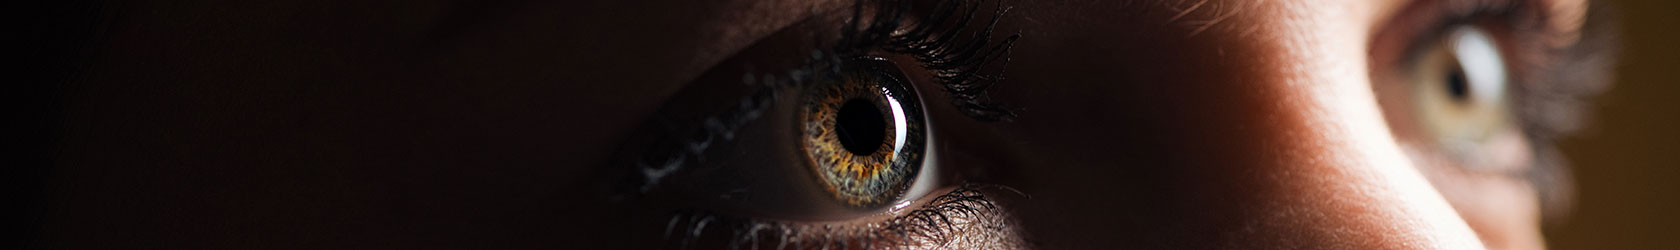 Close-up of woman's eyes looking up into the distance